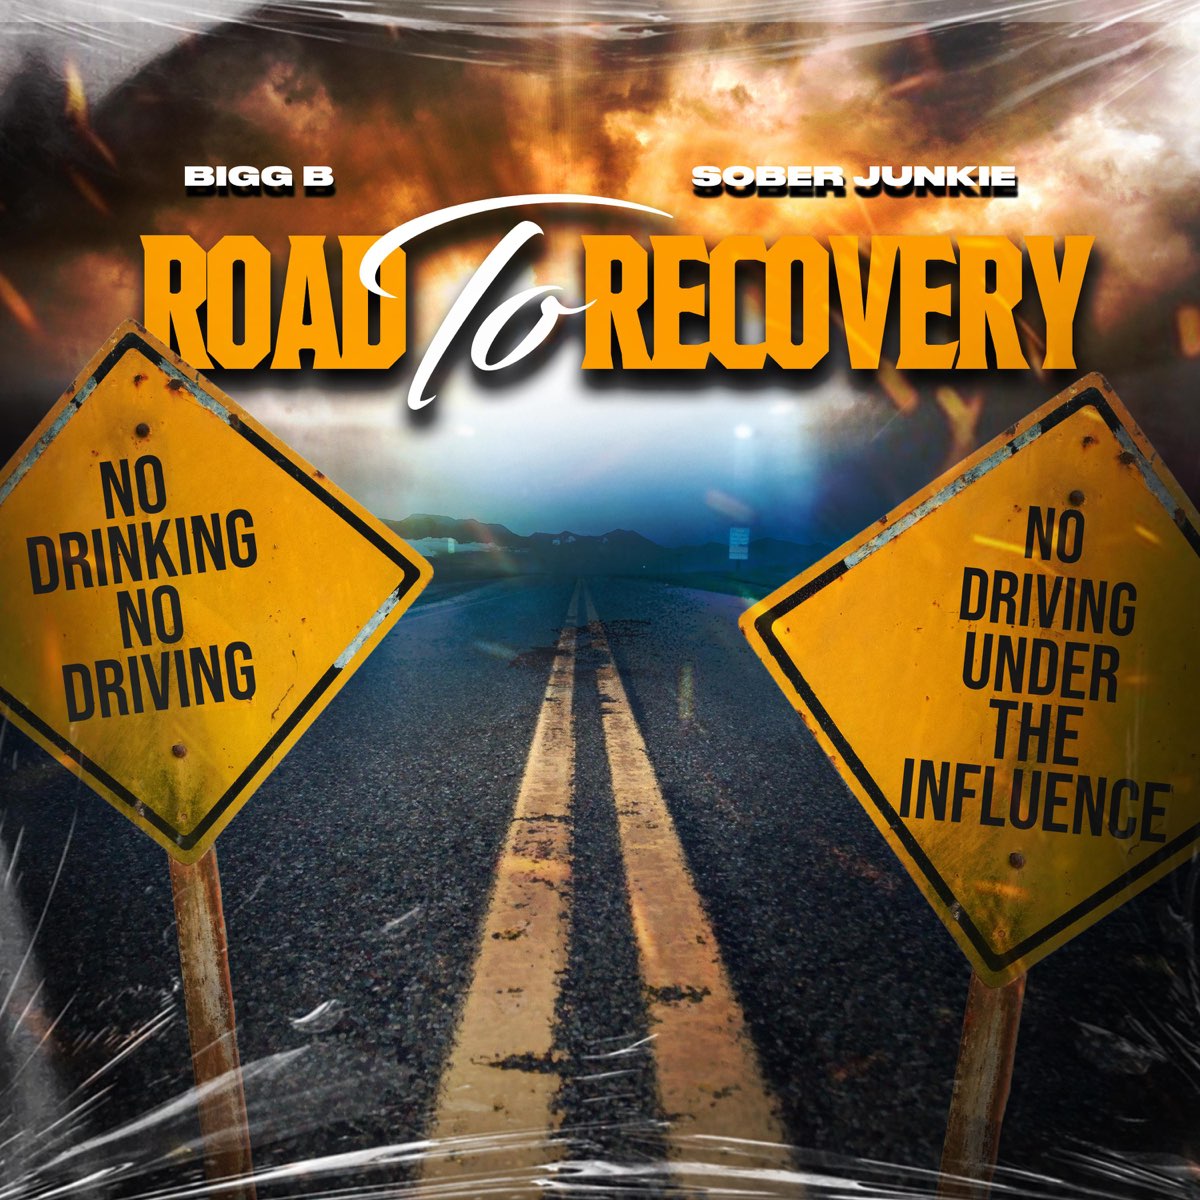 ‎Road to Recovery (feat. Sober Junkie) - Single - Album by BIGG B ...